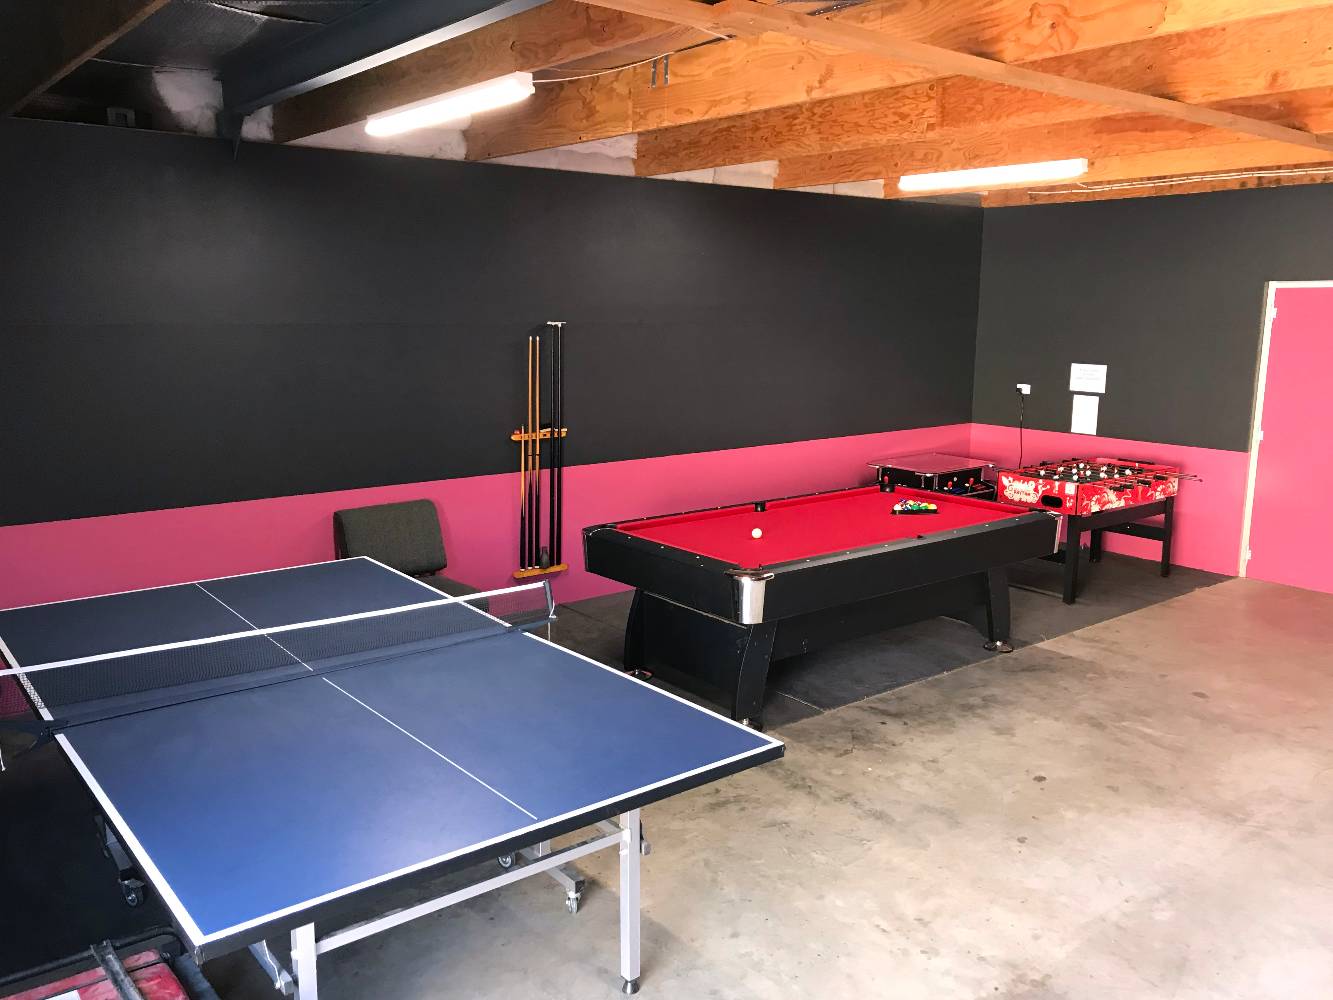 Games room, sit down arcade, pool, table tennis, darts, soccer table.